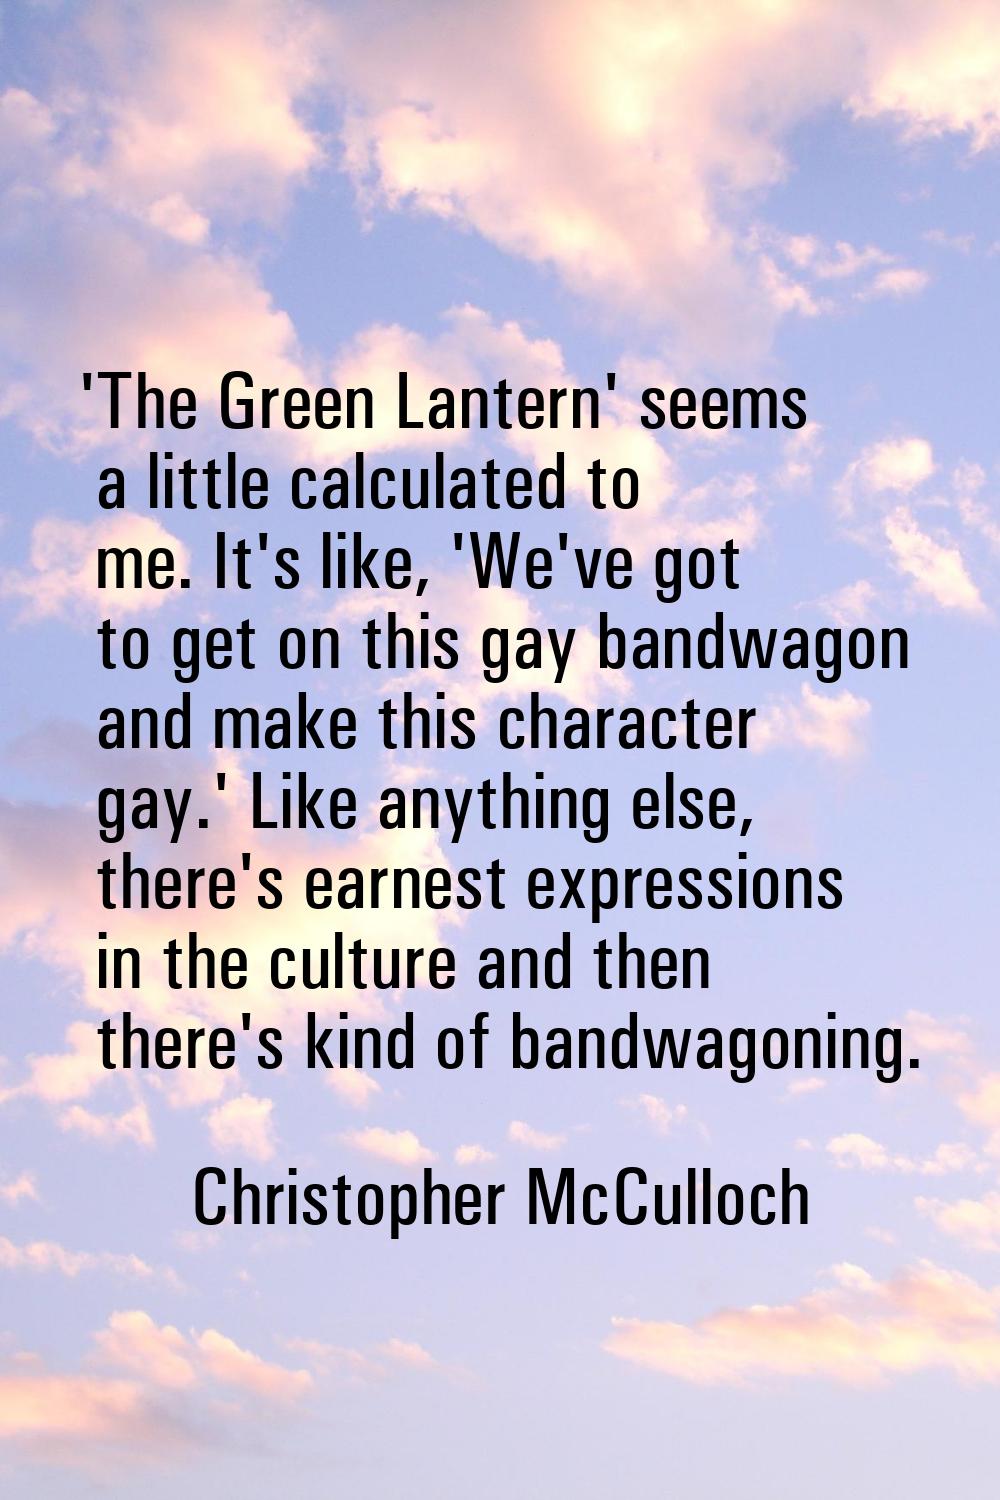 'The Green Lantern' seems a little calculated to me. It's like, 'We've got to get on this gay bandw